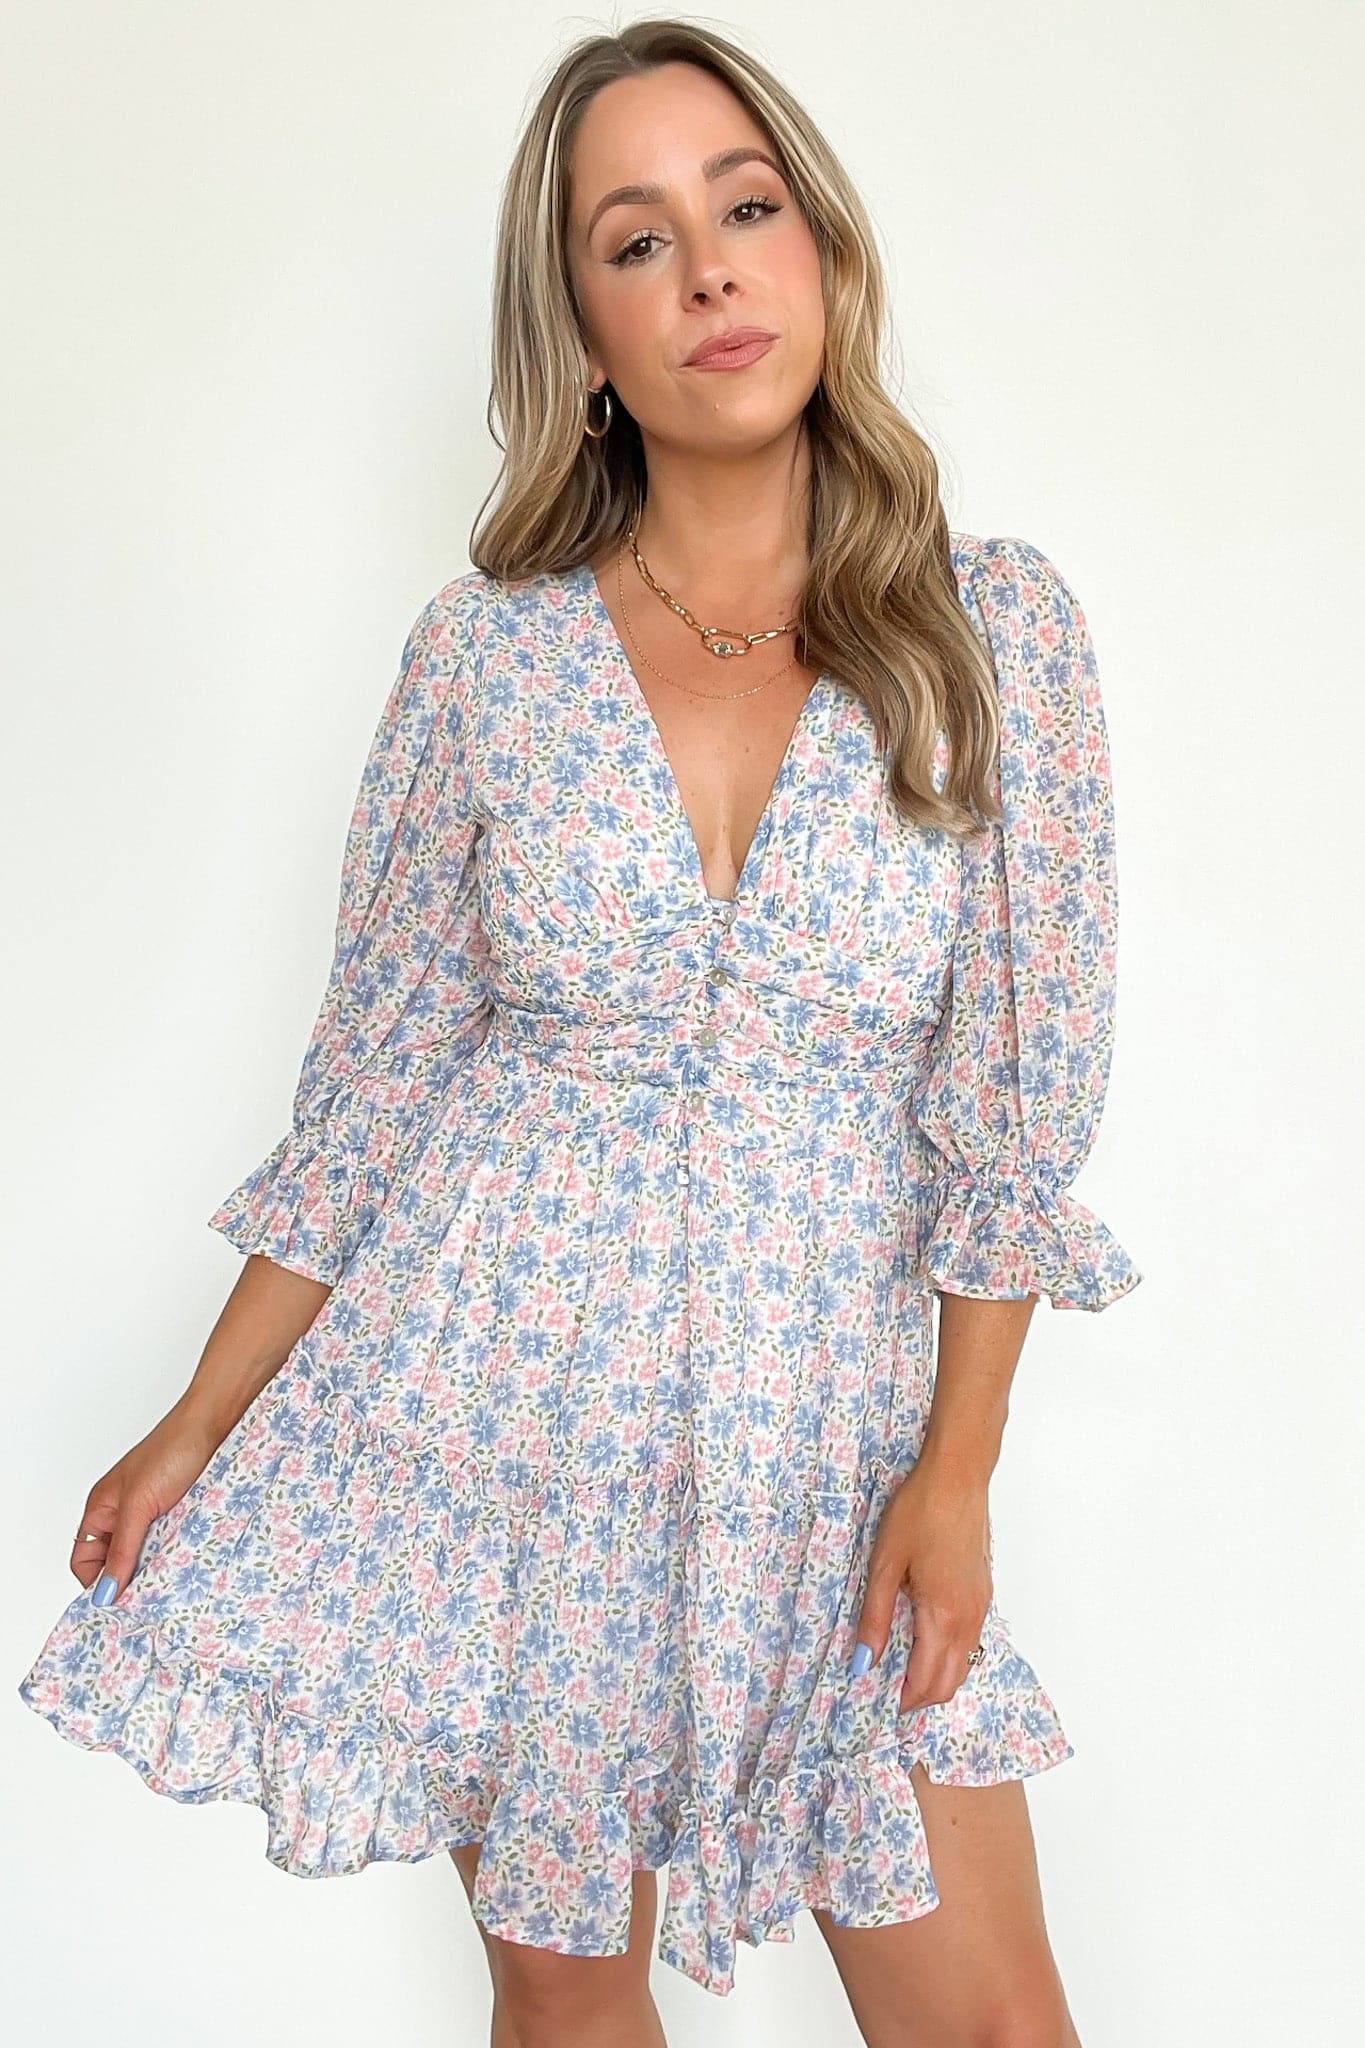  Garden of Glamour Floral Ruffle V-Neck Dress - FINAL SALE - Madison and Mallory